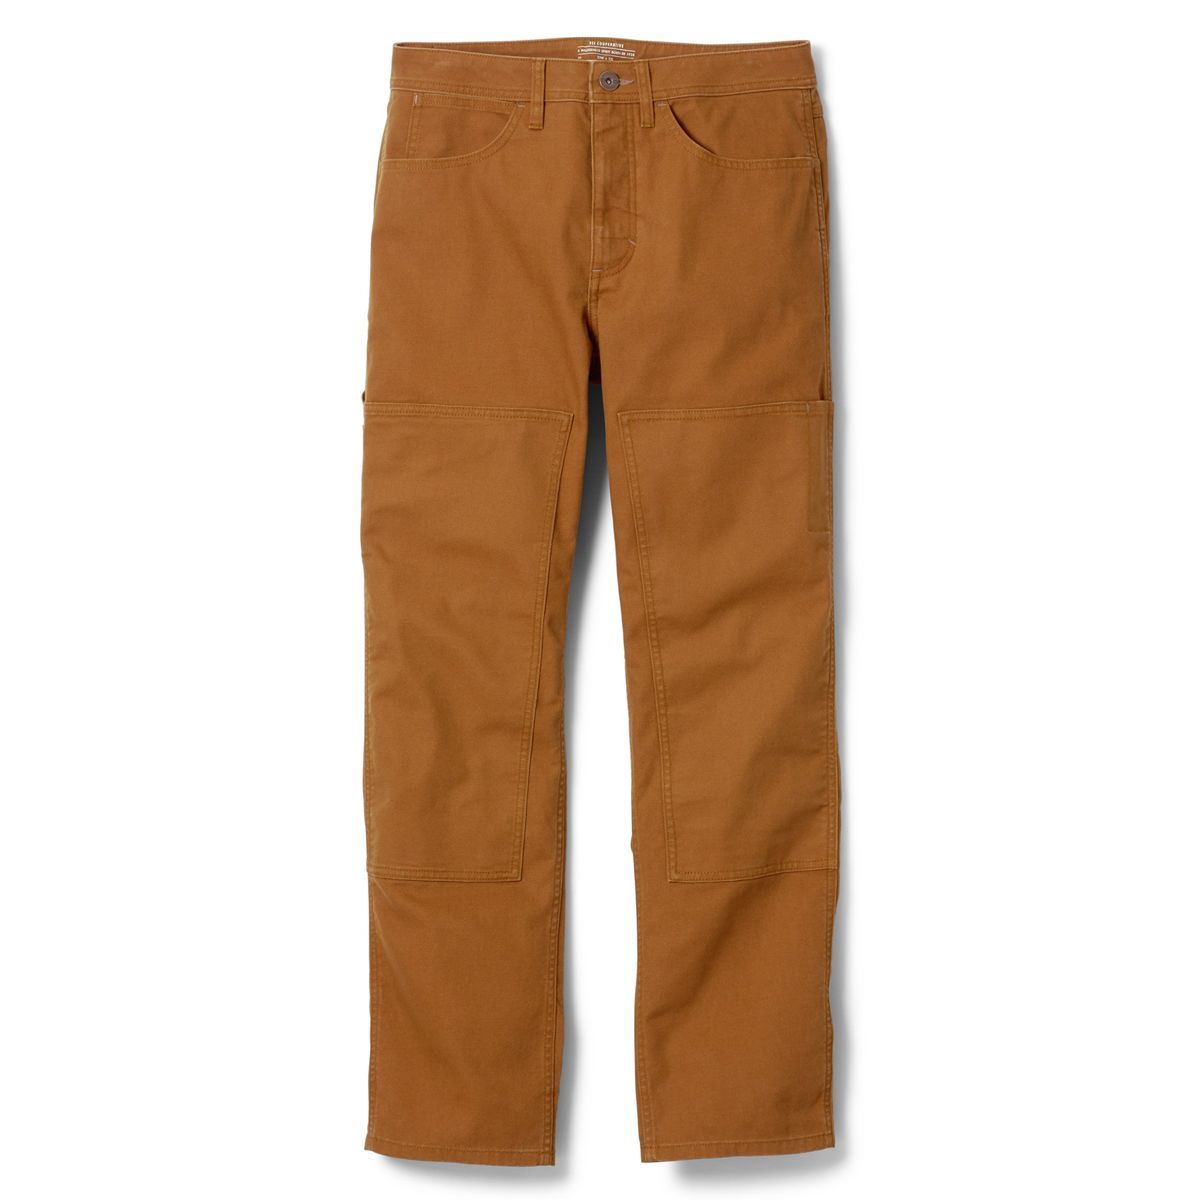 17 Rugged Work Pants That Are Built To Last